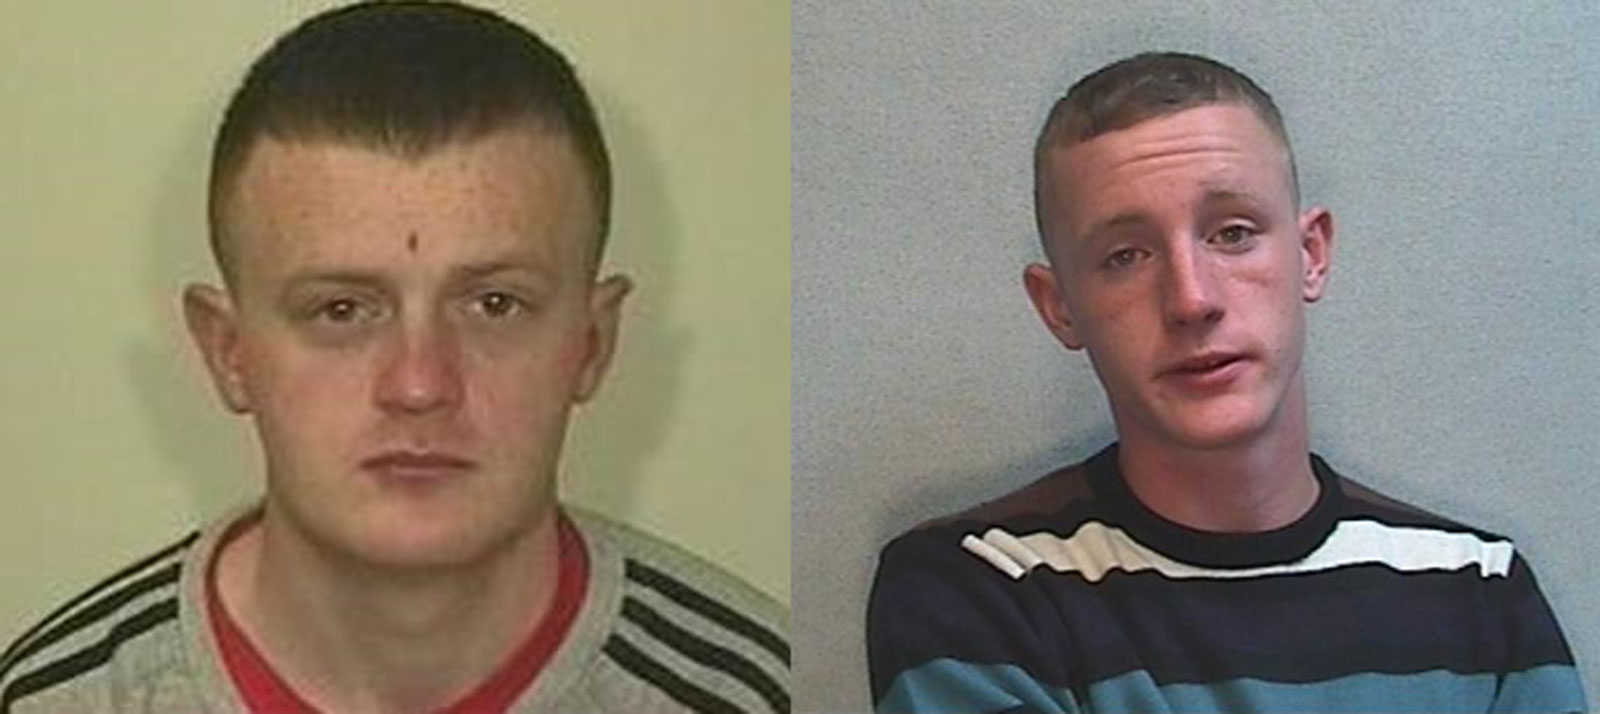 Robert Lodge, now 27, and Andrew Rubery, now 26